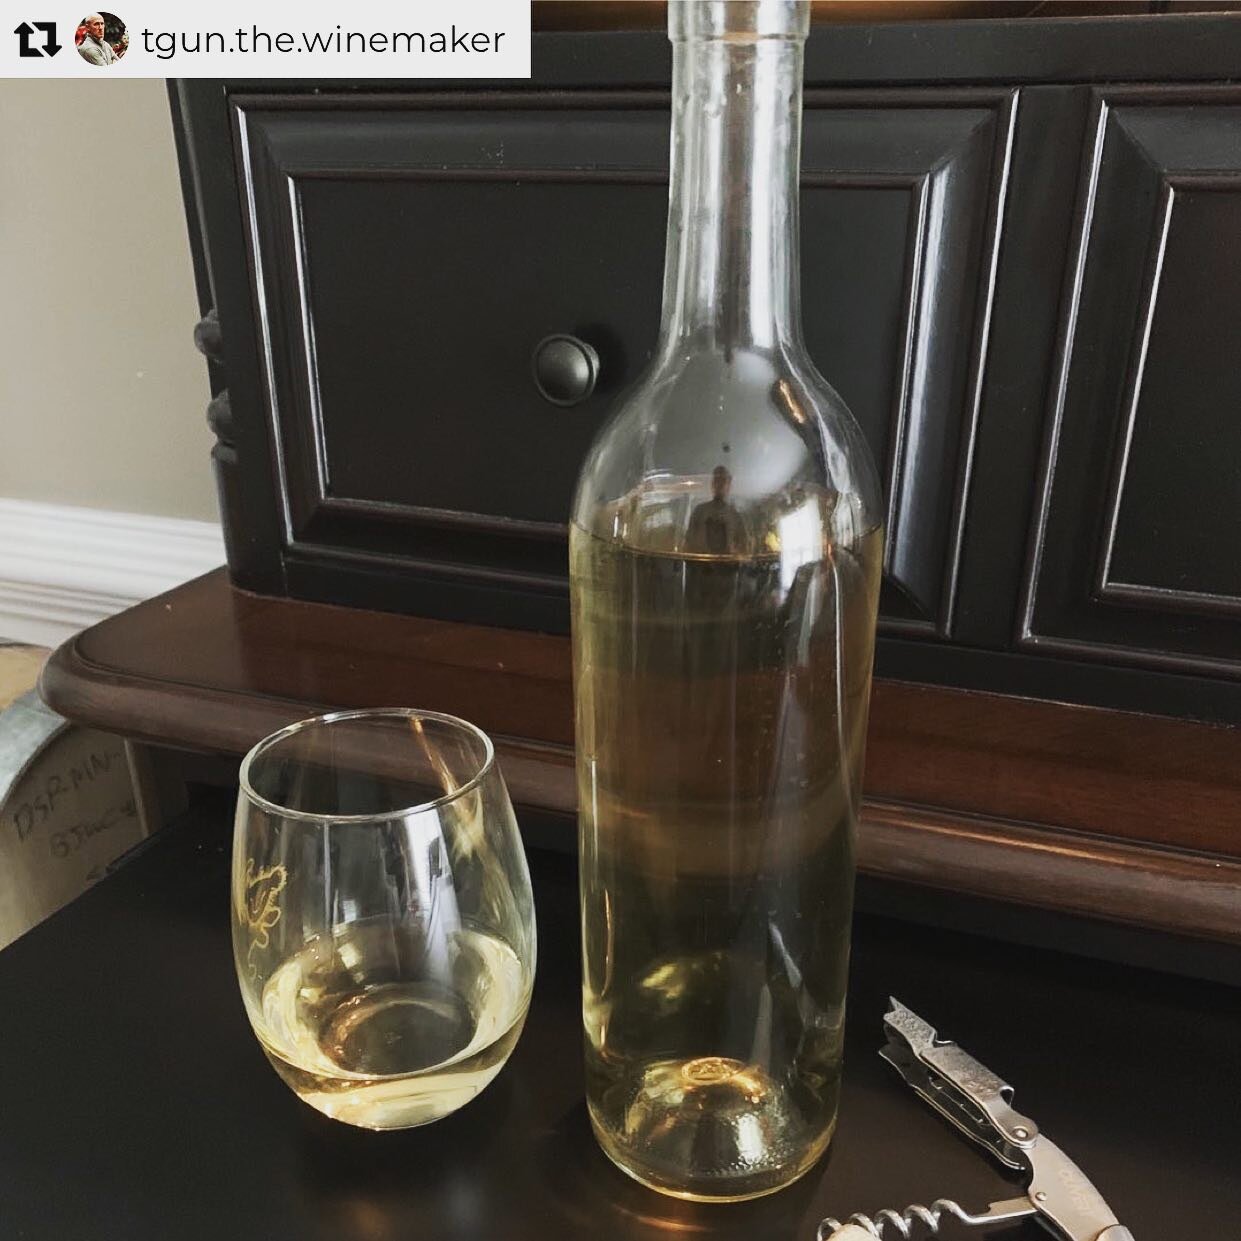 Repost from @tgun.the.winemaker
&bull;
I bottled a small portion of my Bordeaux-style white wine with 2/3 Sauvignon Blanc and 1/3 Semillon from Washington (calling it &ldquo;WA Blanc&rdquo;) to share among family and friends! Thank you Wine Grapes Di